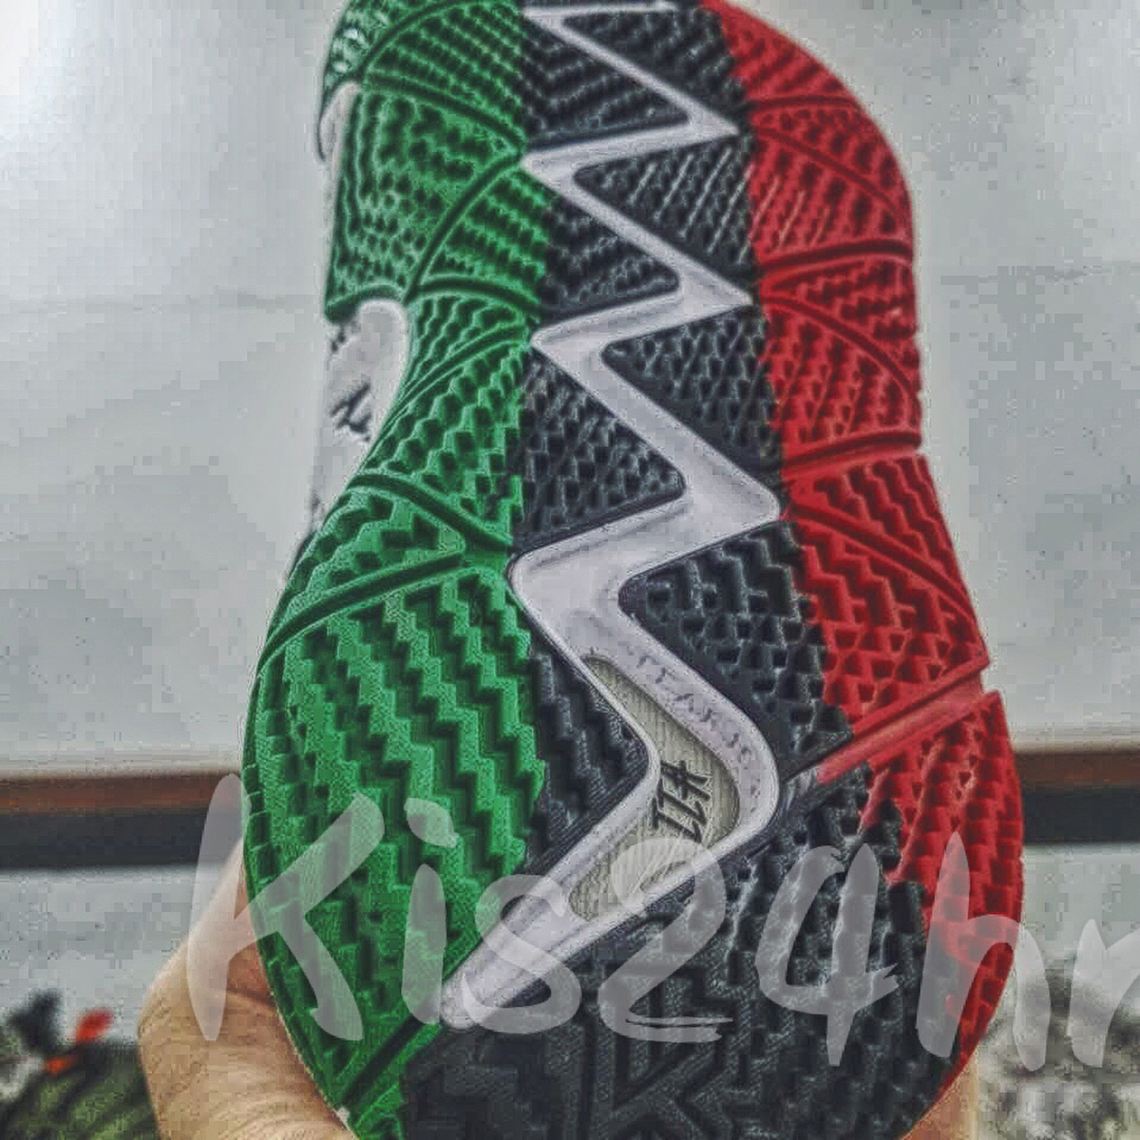 bomba Perseo Perezoso Nike Kyrie 4 "Equality" BHM Collection First Look | SneakerNews.com